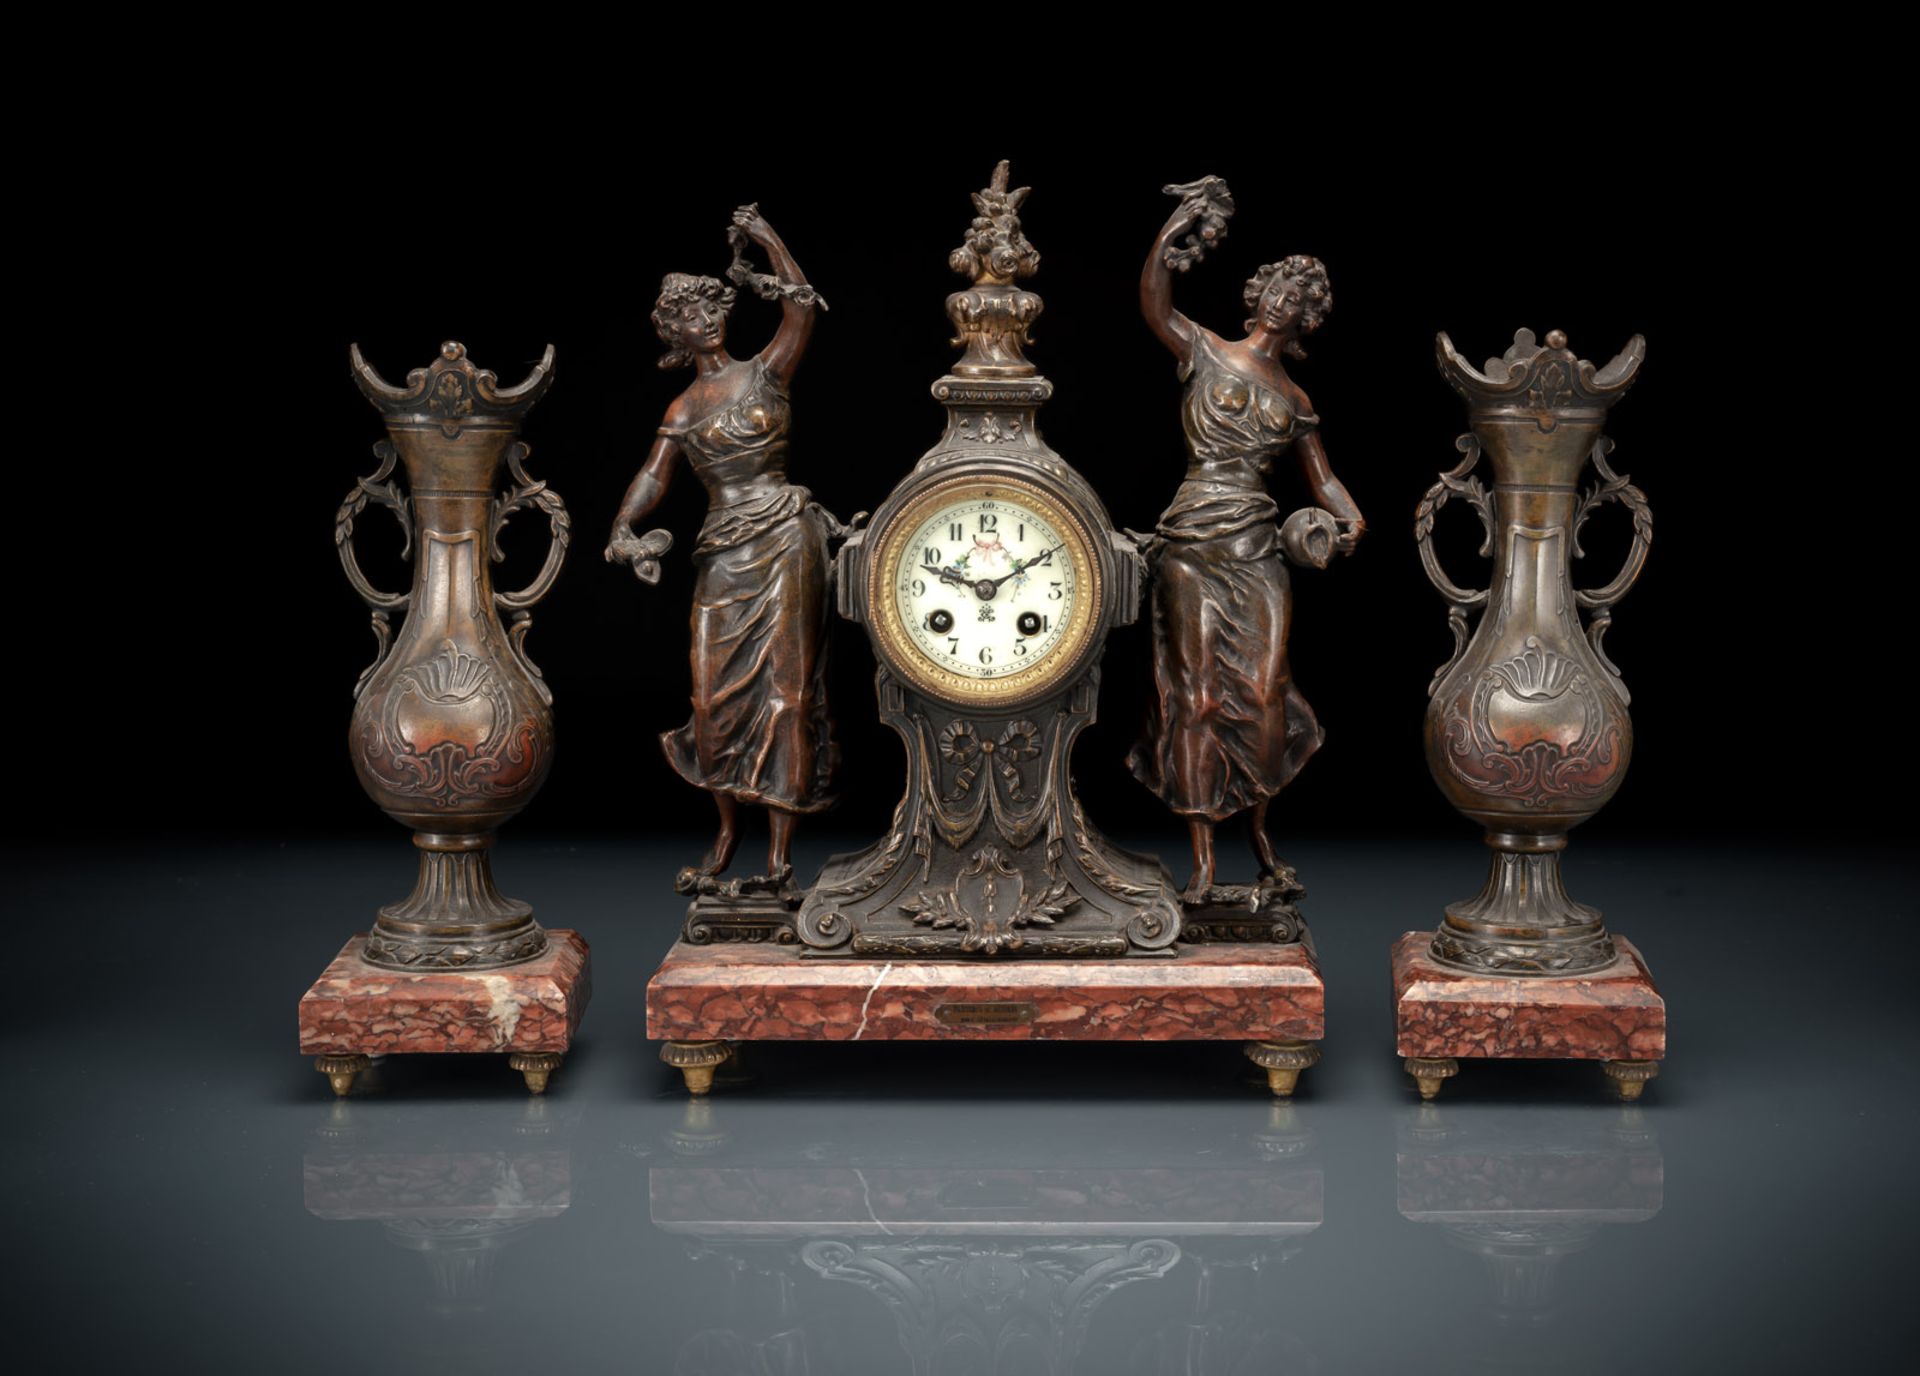 A FRENCH ART-NOUVEAU BRONZE AND MARBLE THREE-PIECE CLOCK GARNITURE